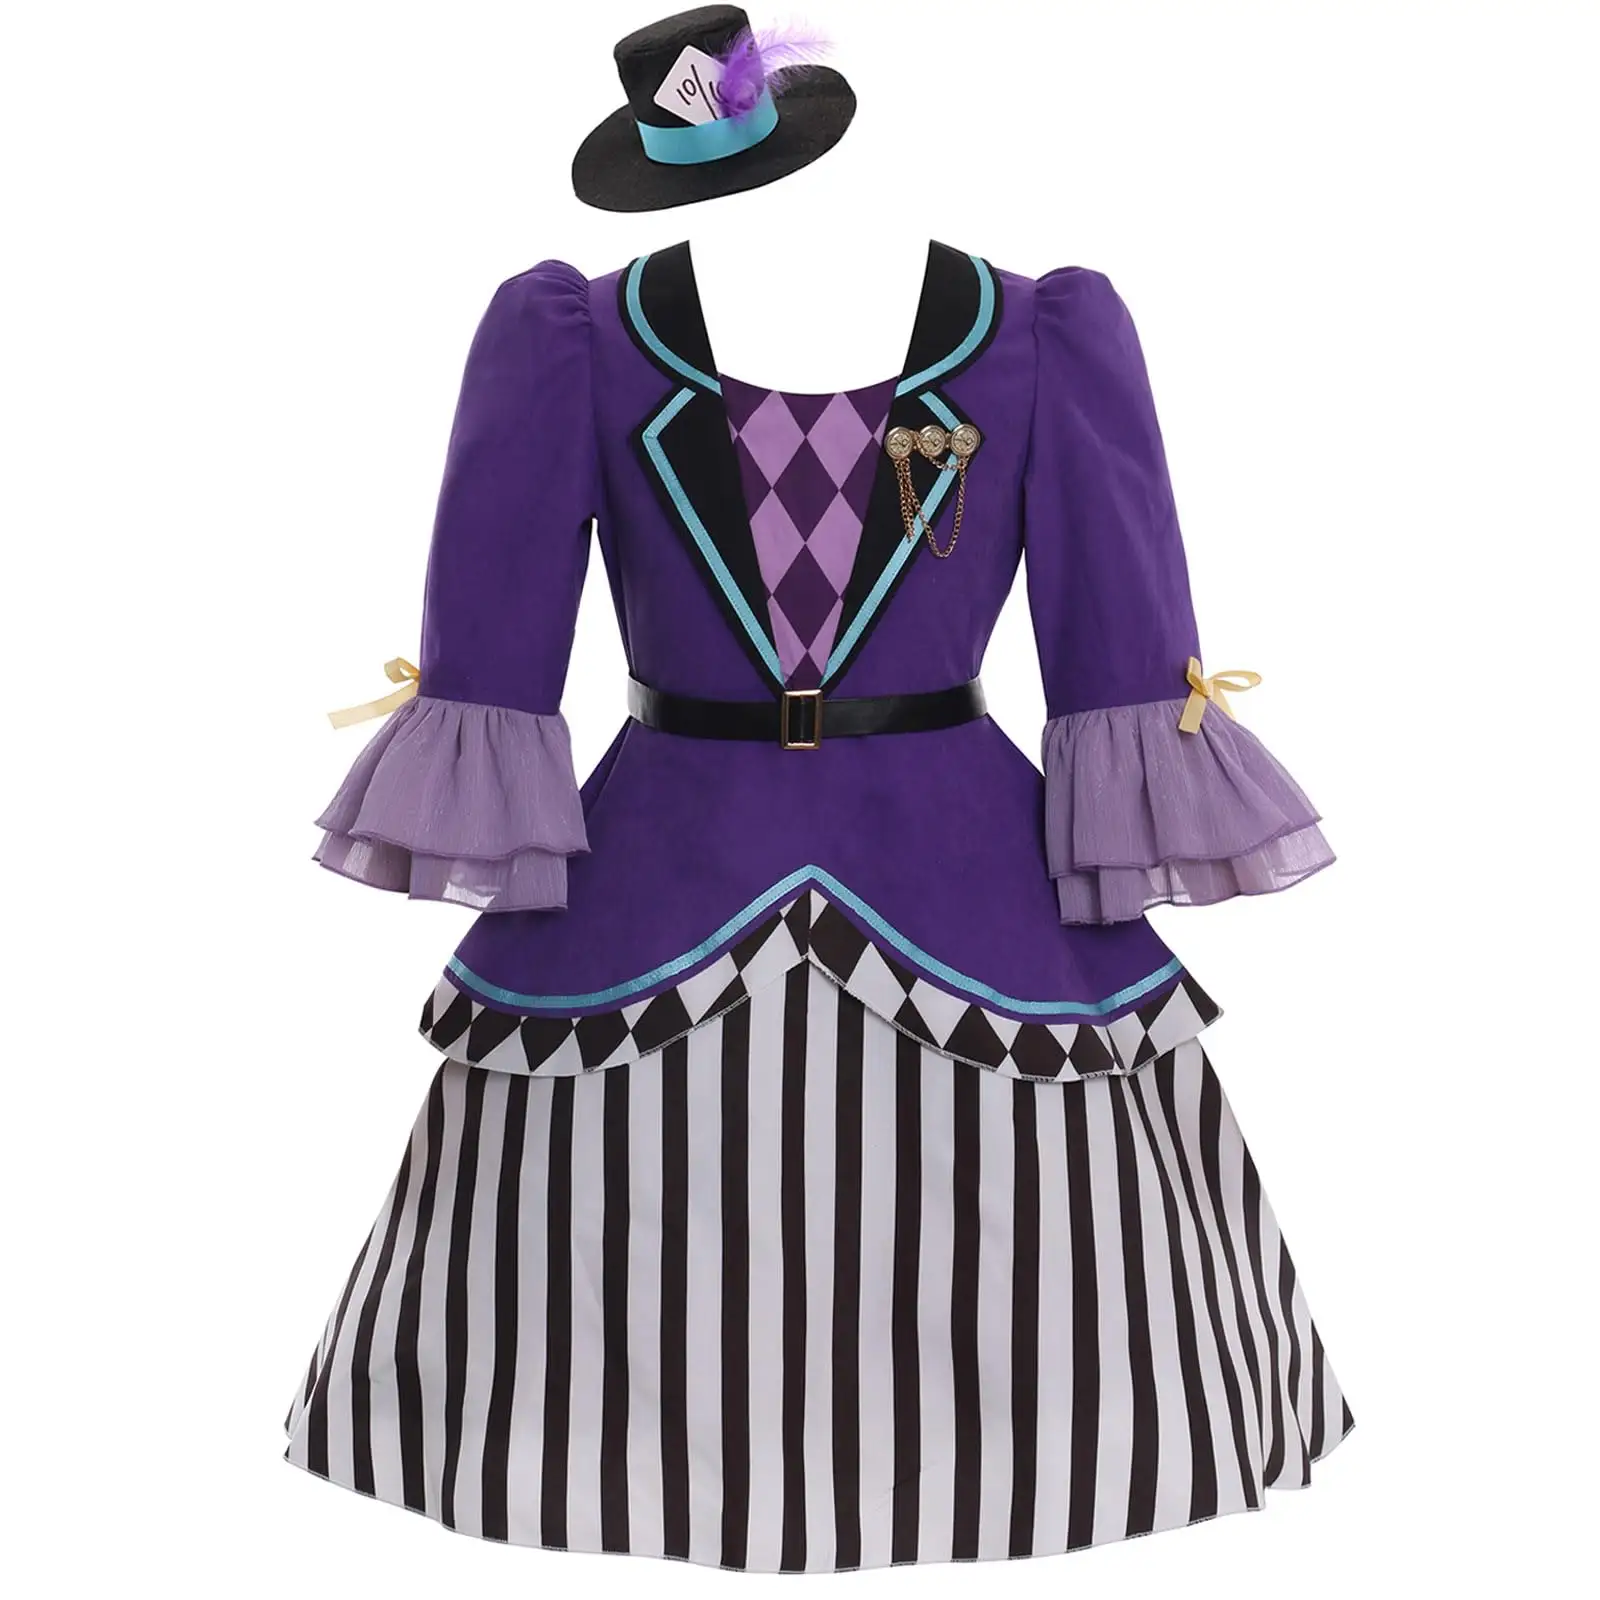 Halloween Girls Mad Hatter Purple Costume with Hat Clips Fairytale Party Dress Outfit Fancy Prom Dress Kids Role Play Dress Up